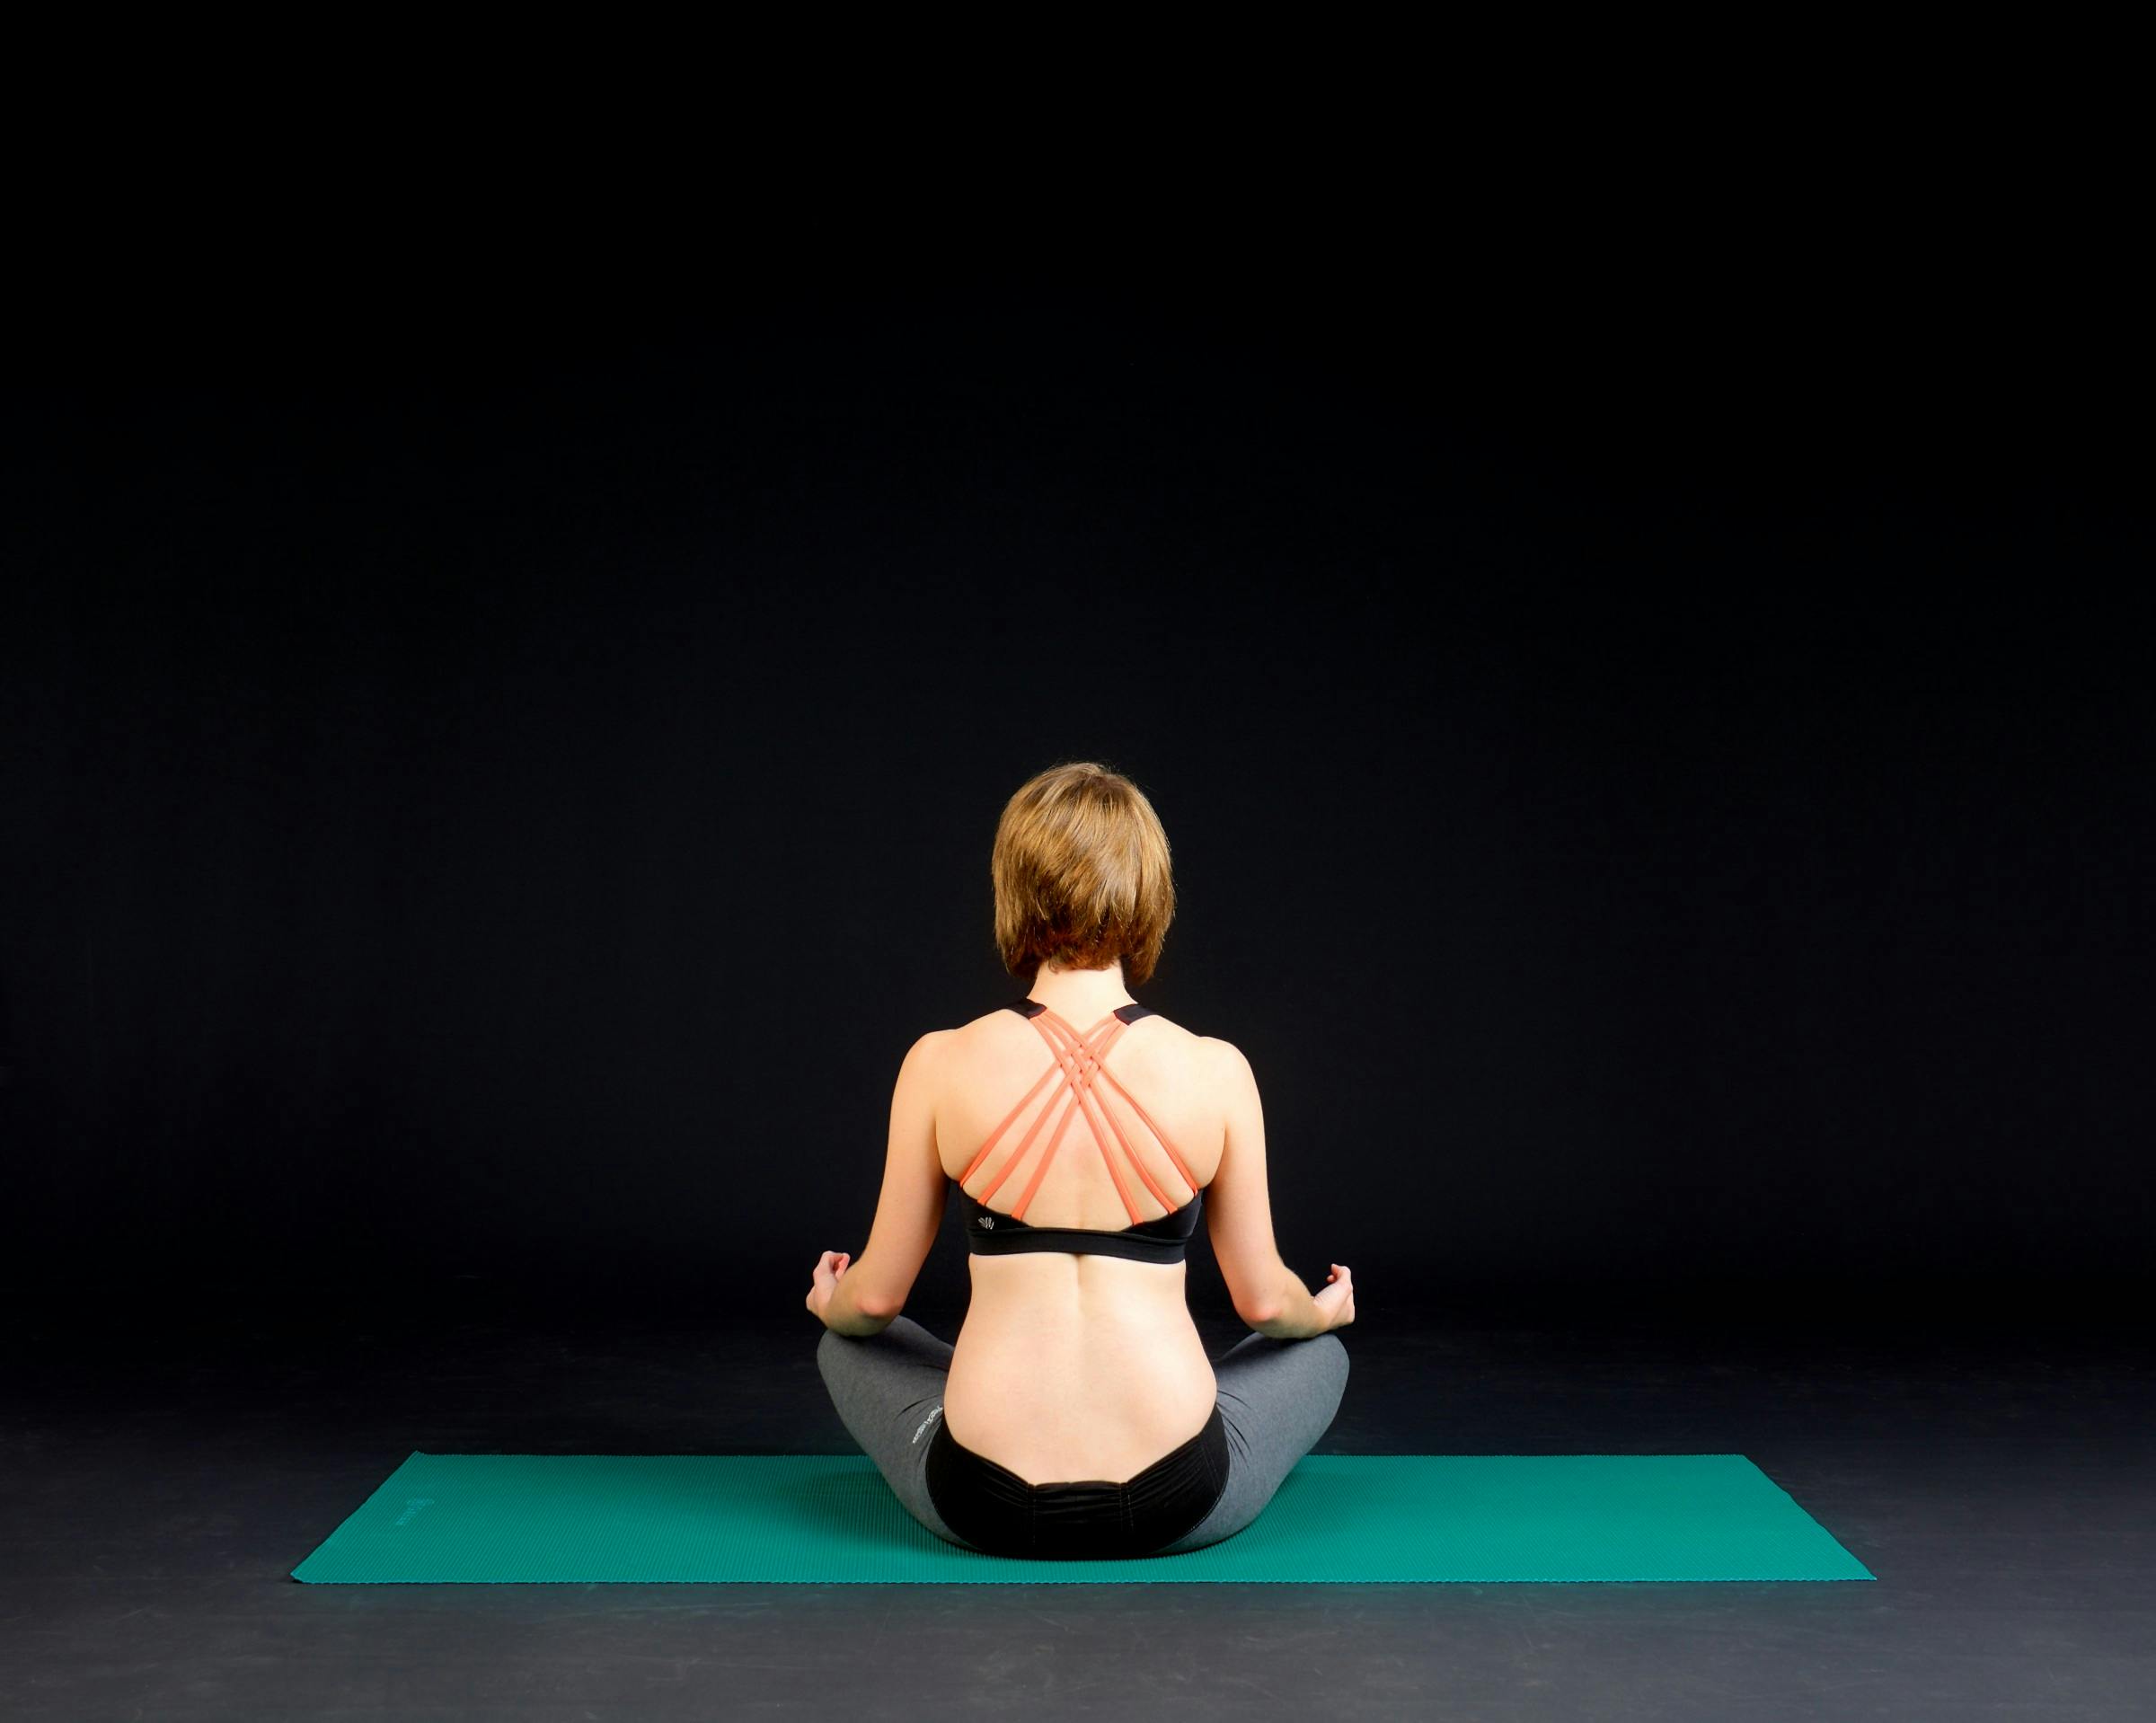 Woman practicing yoga on a teal mat.